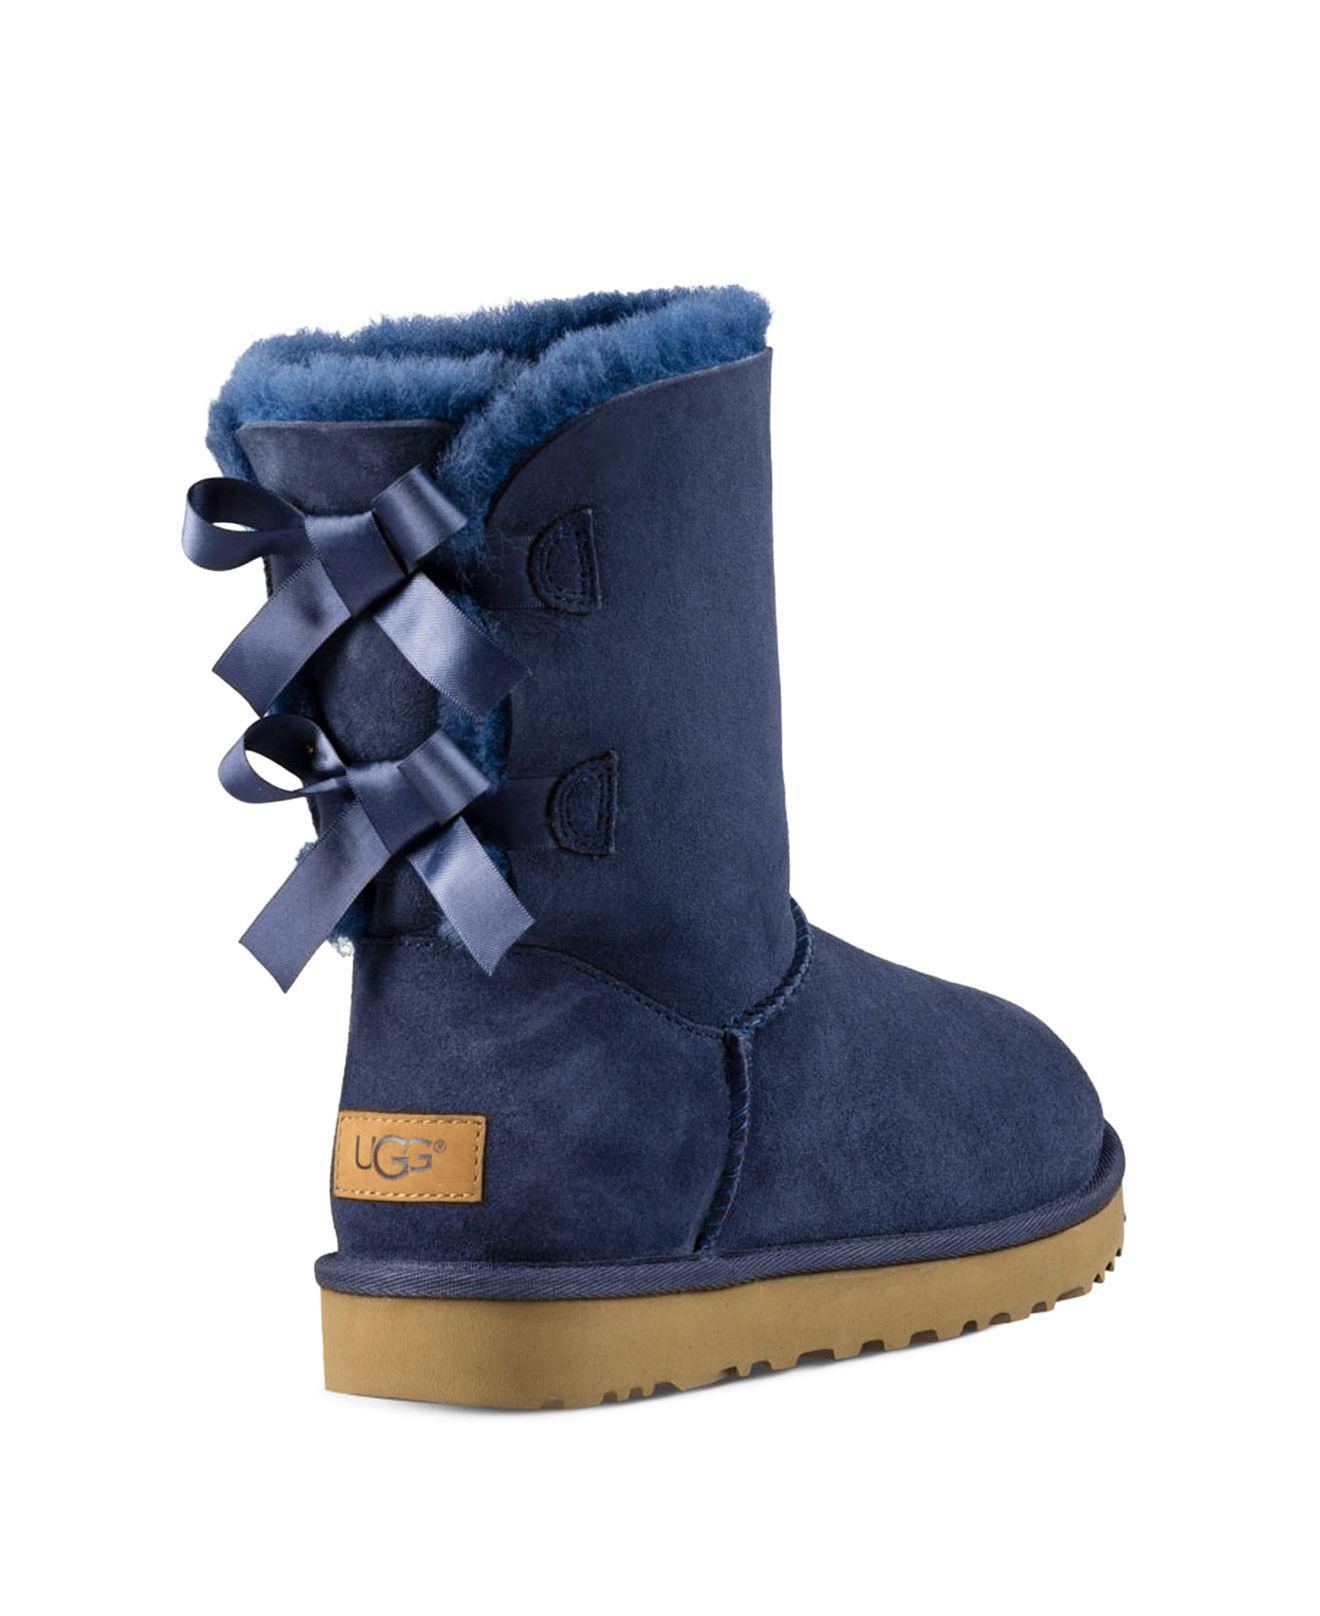 UGG UGG Bailey Bow Ii Genuine Shearling Boot in Blue | Lyst